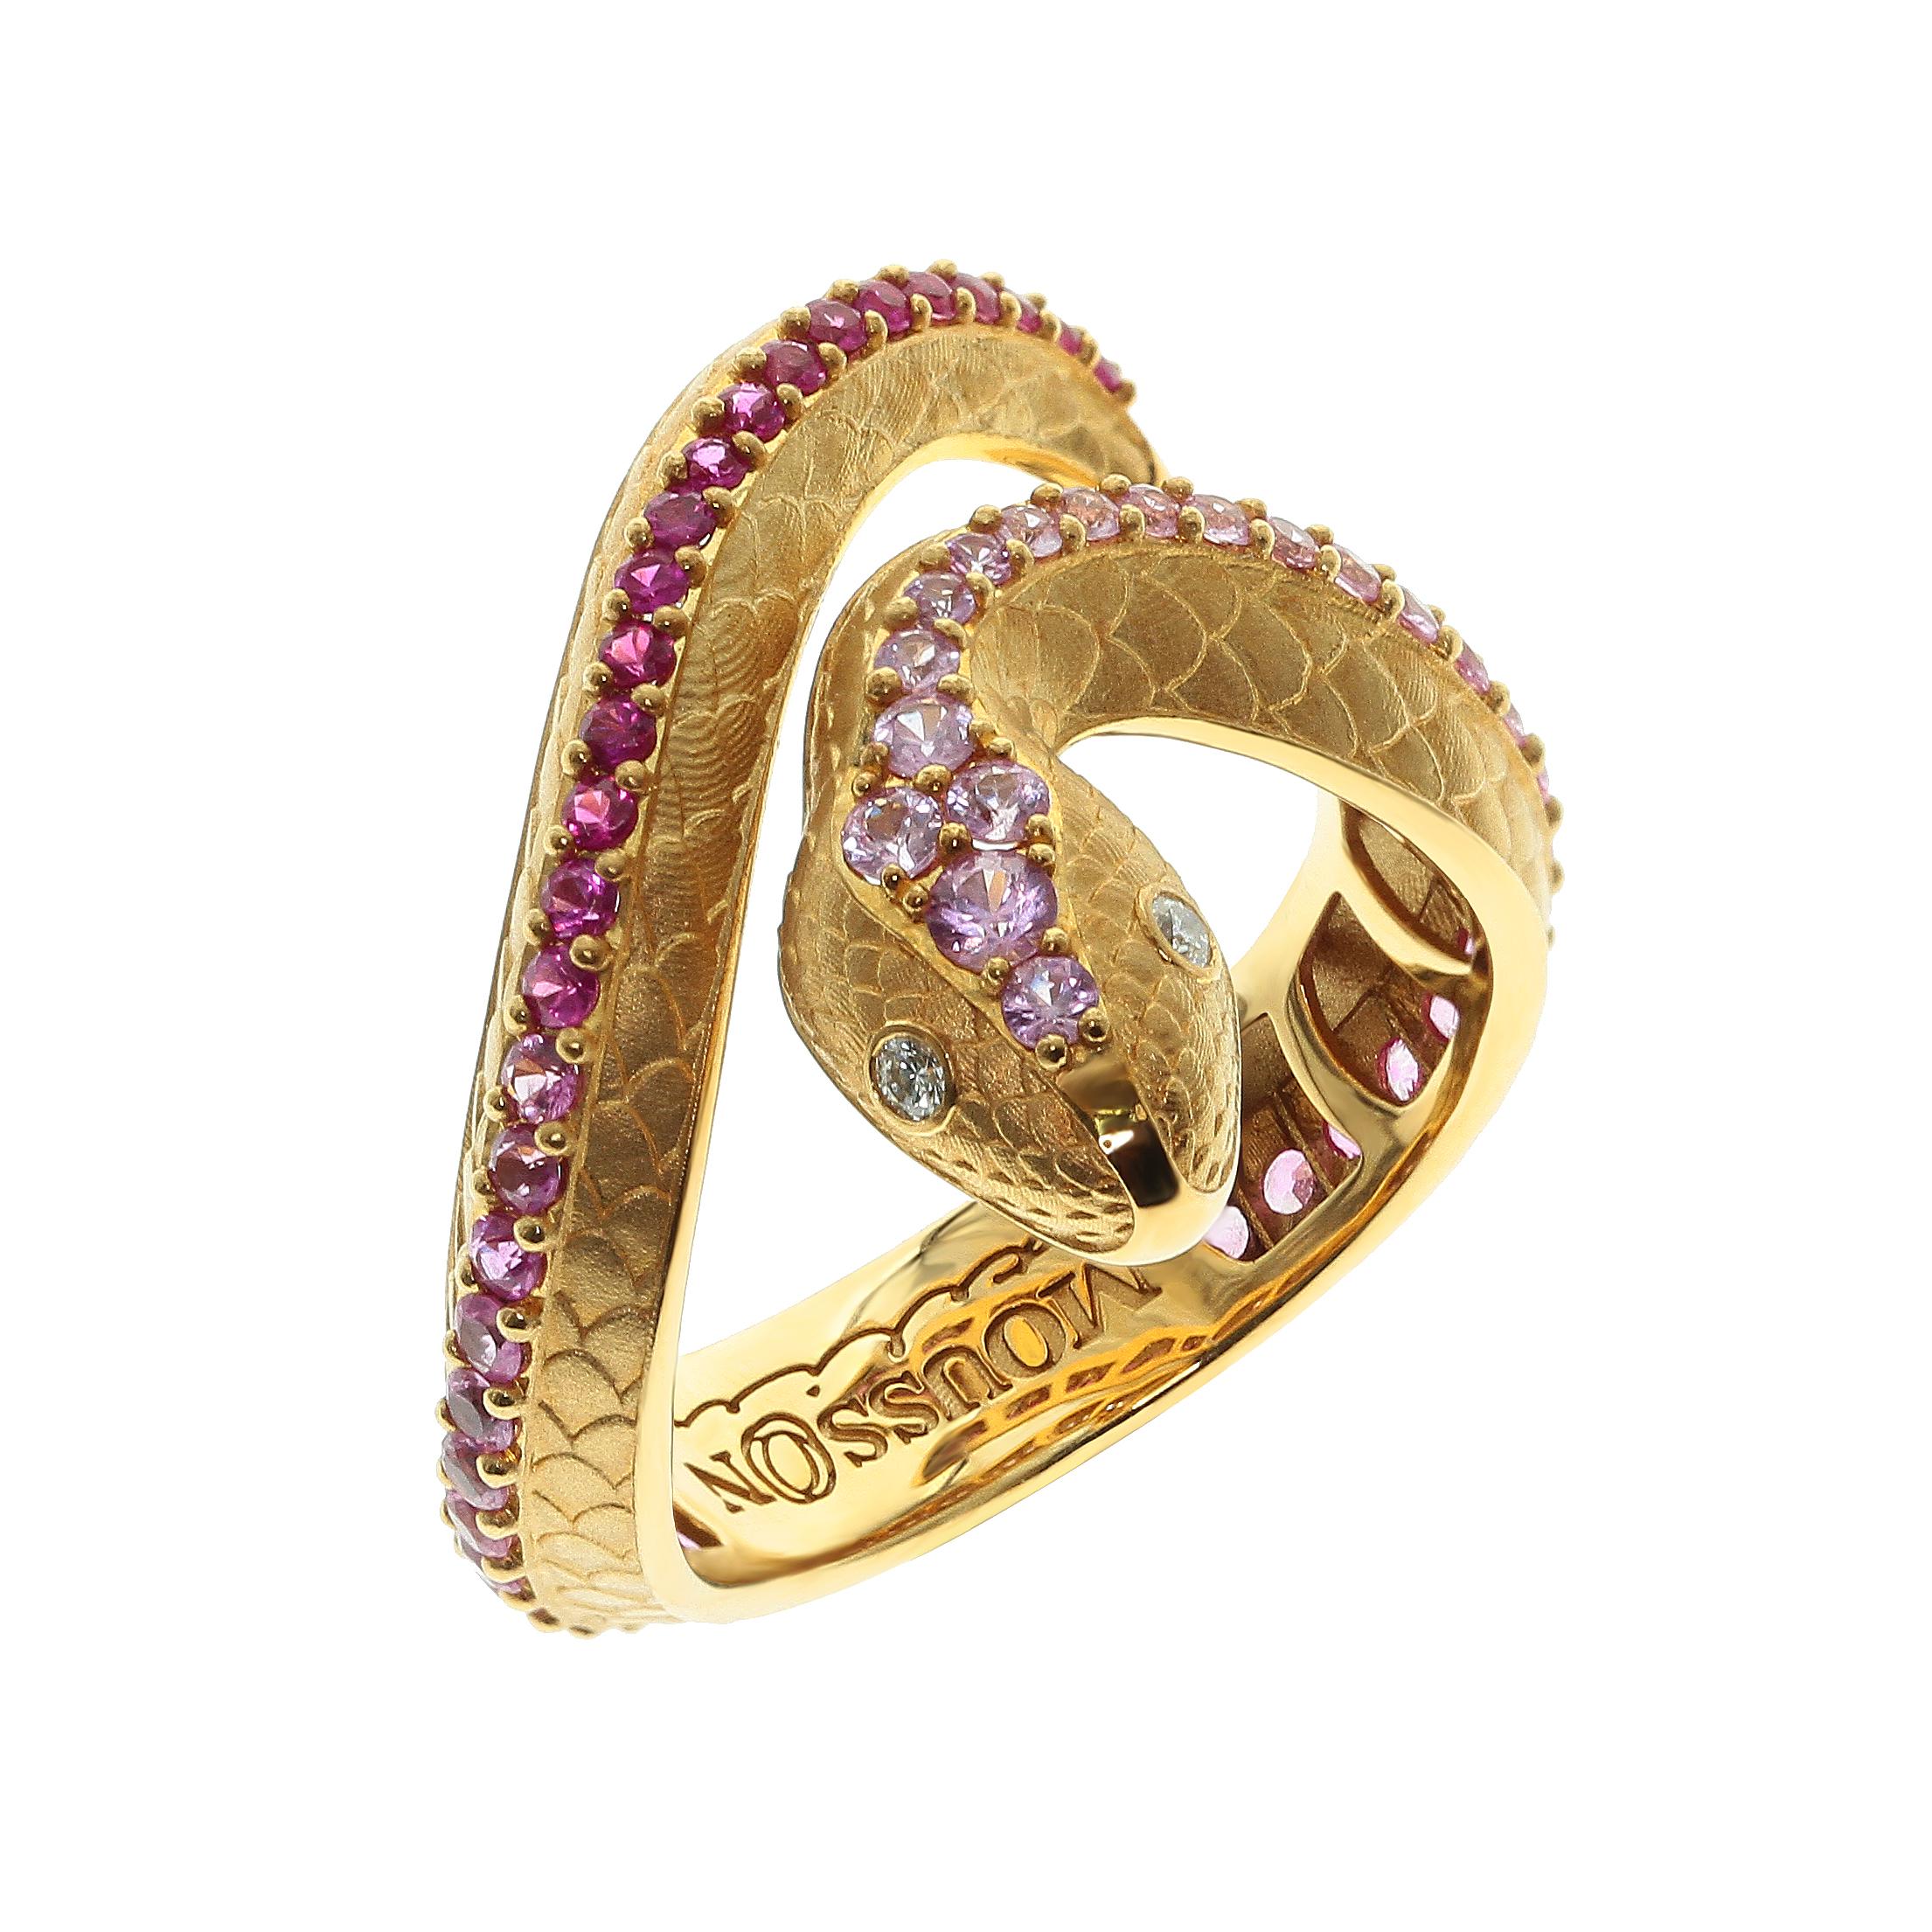 Pink Sapphire Diamonds 18 Karat Yellow Gold Snake Ring

Just take a look on this hi-detailed Ring, distributes all the wisdom of the Snake. Carefully selected color graduation from Pink Sapphires to Diamonds gives the impression that Snake is